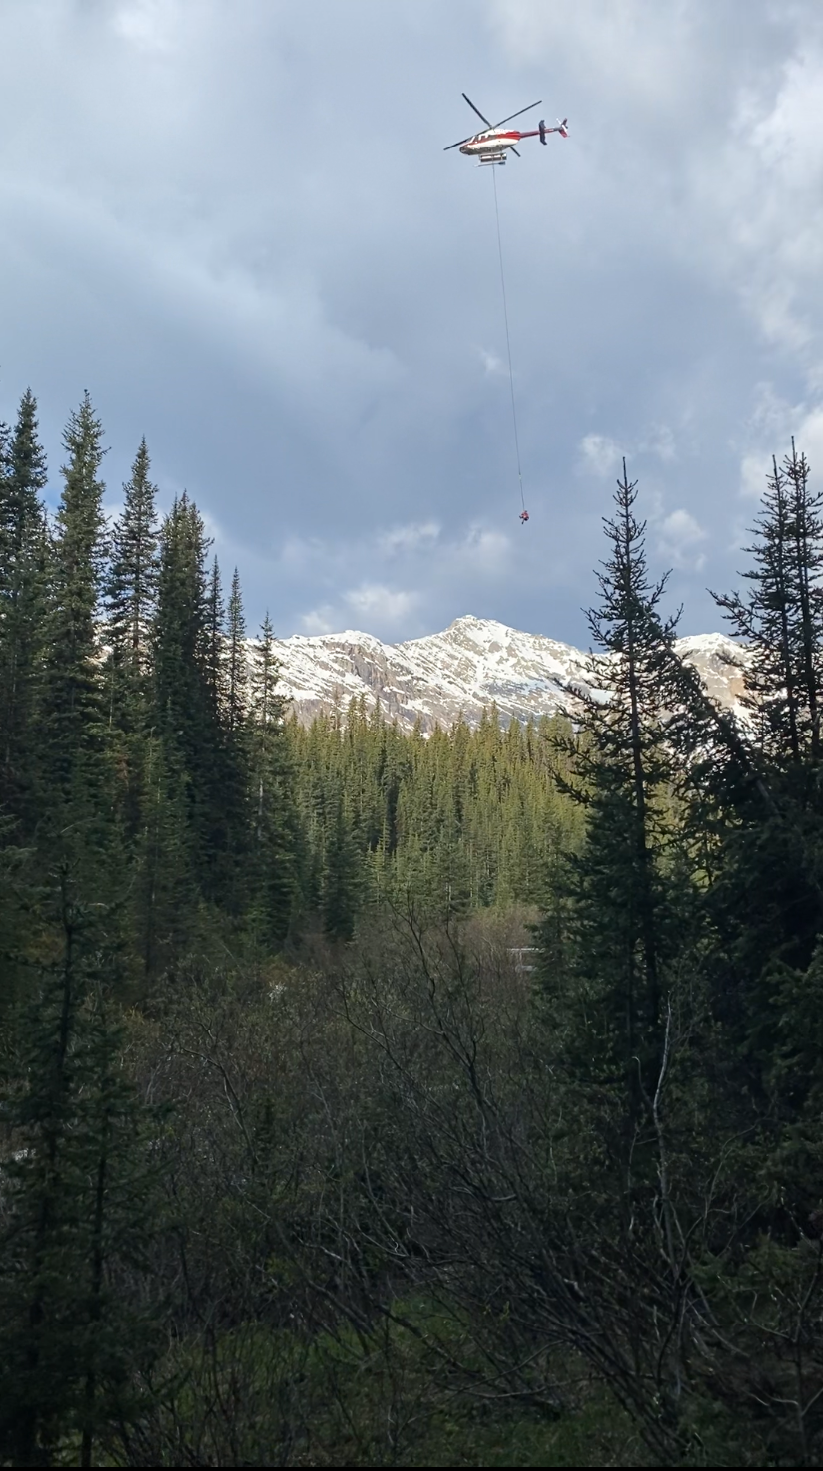 Backcountry Campers Assist in Dramatic Late-Night Rescue in Banff